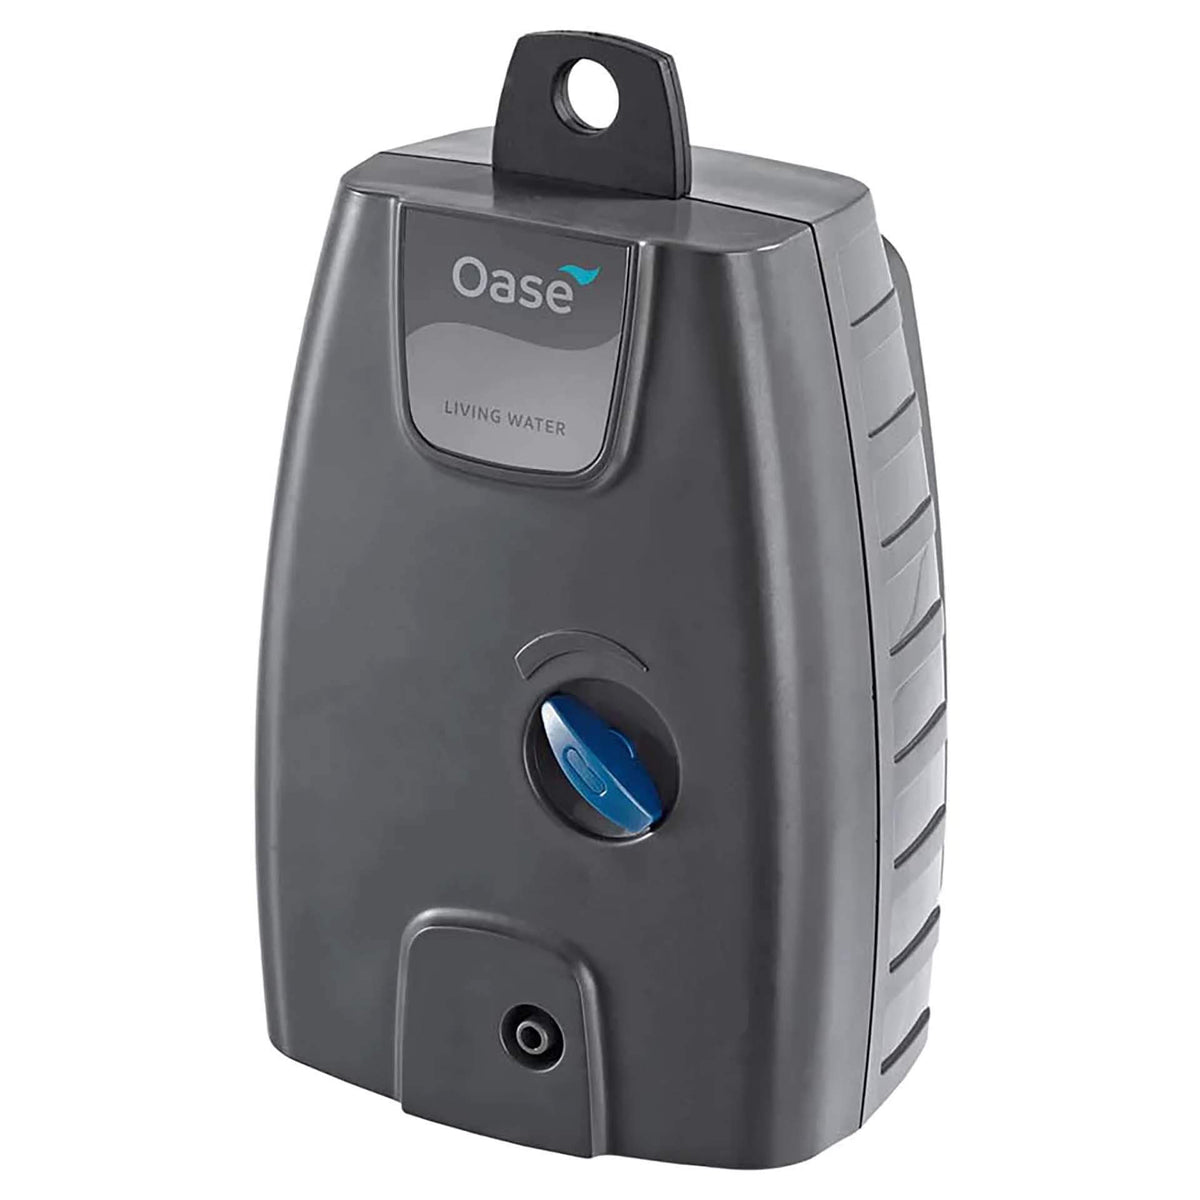 Oase Oxymax 100 Air Pump - Single Outlet